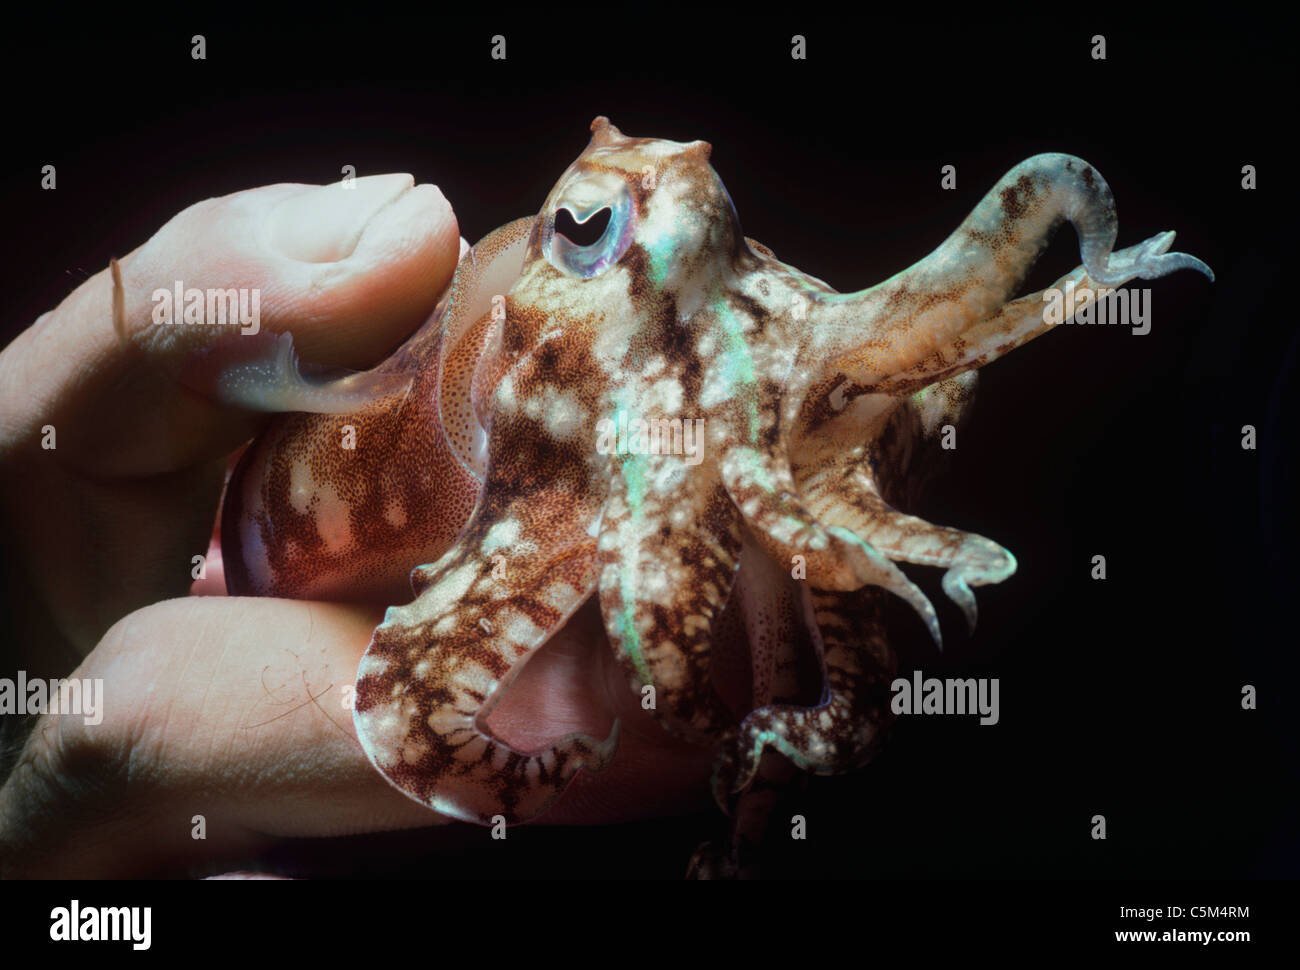 Cuttlefish (Sepia officinalis) held by a diver at night. Ustica Island, Italy - Mediterranean Sea Stock Photo